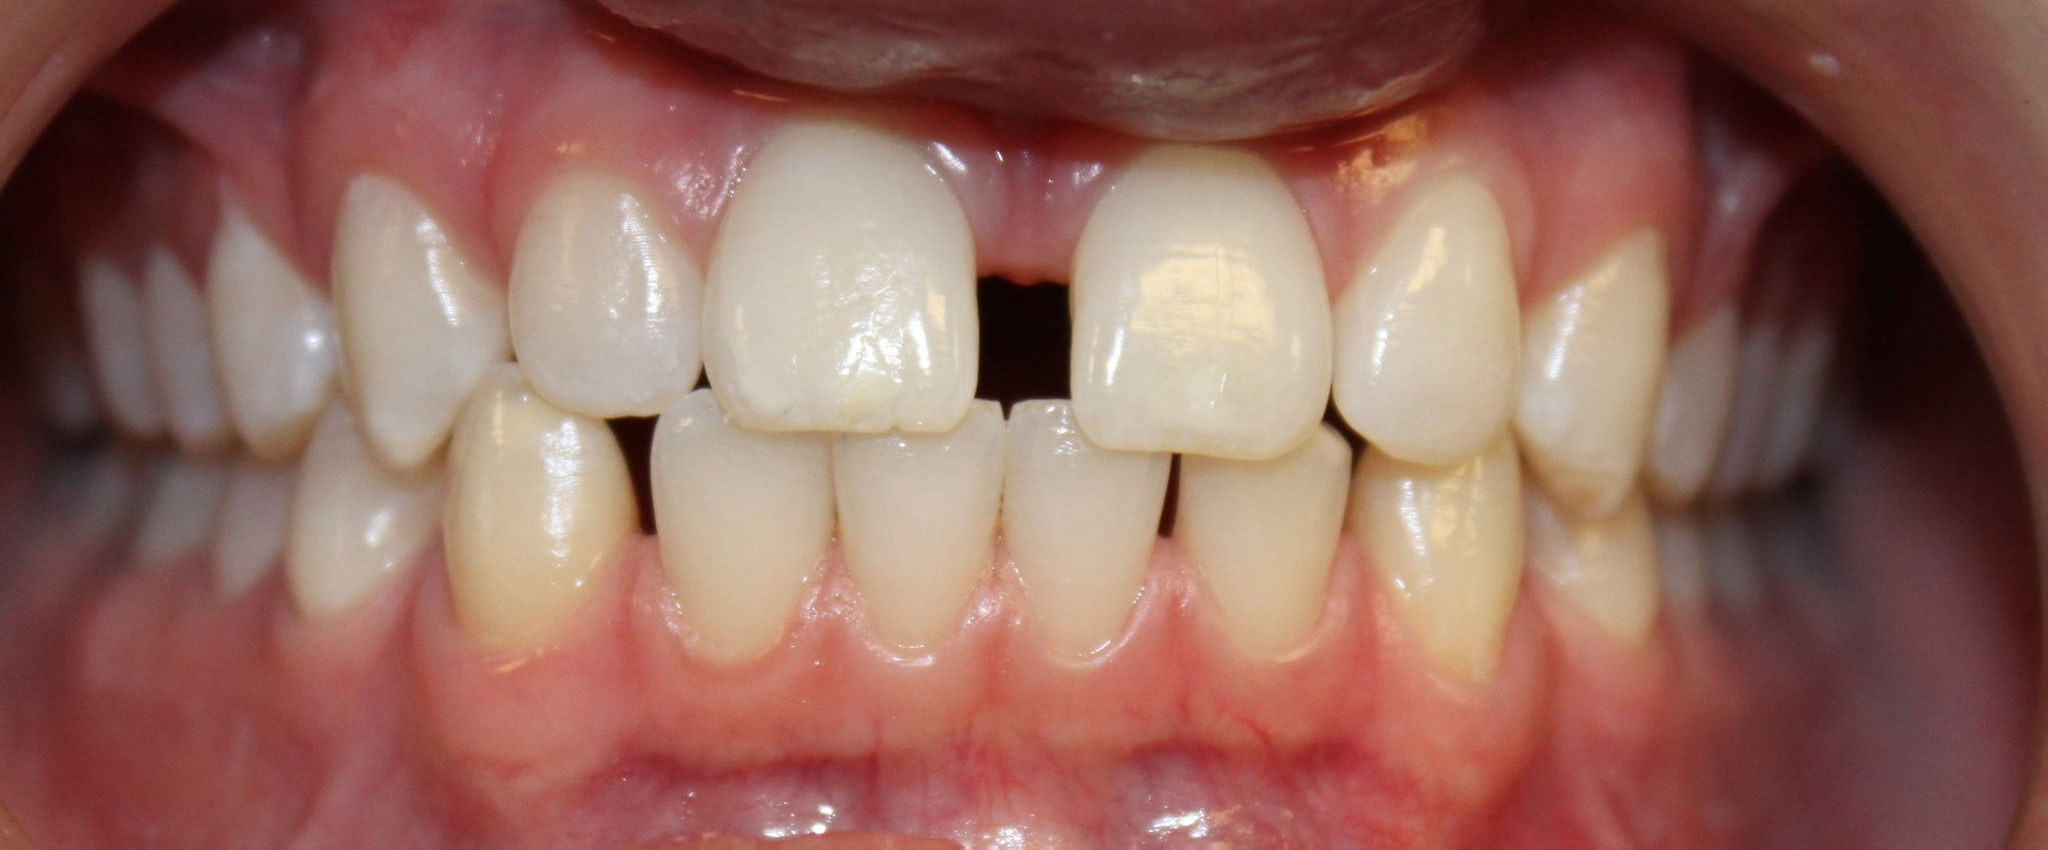 BEFORE | Invisalign treatment patient had severe gapping